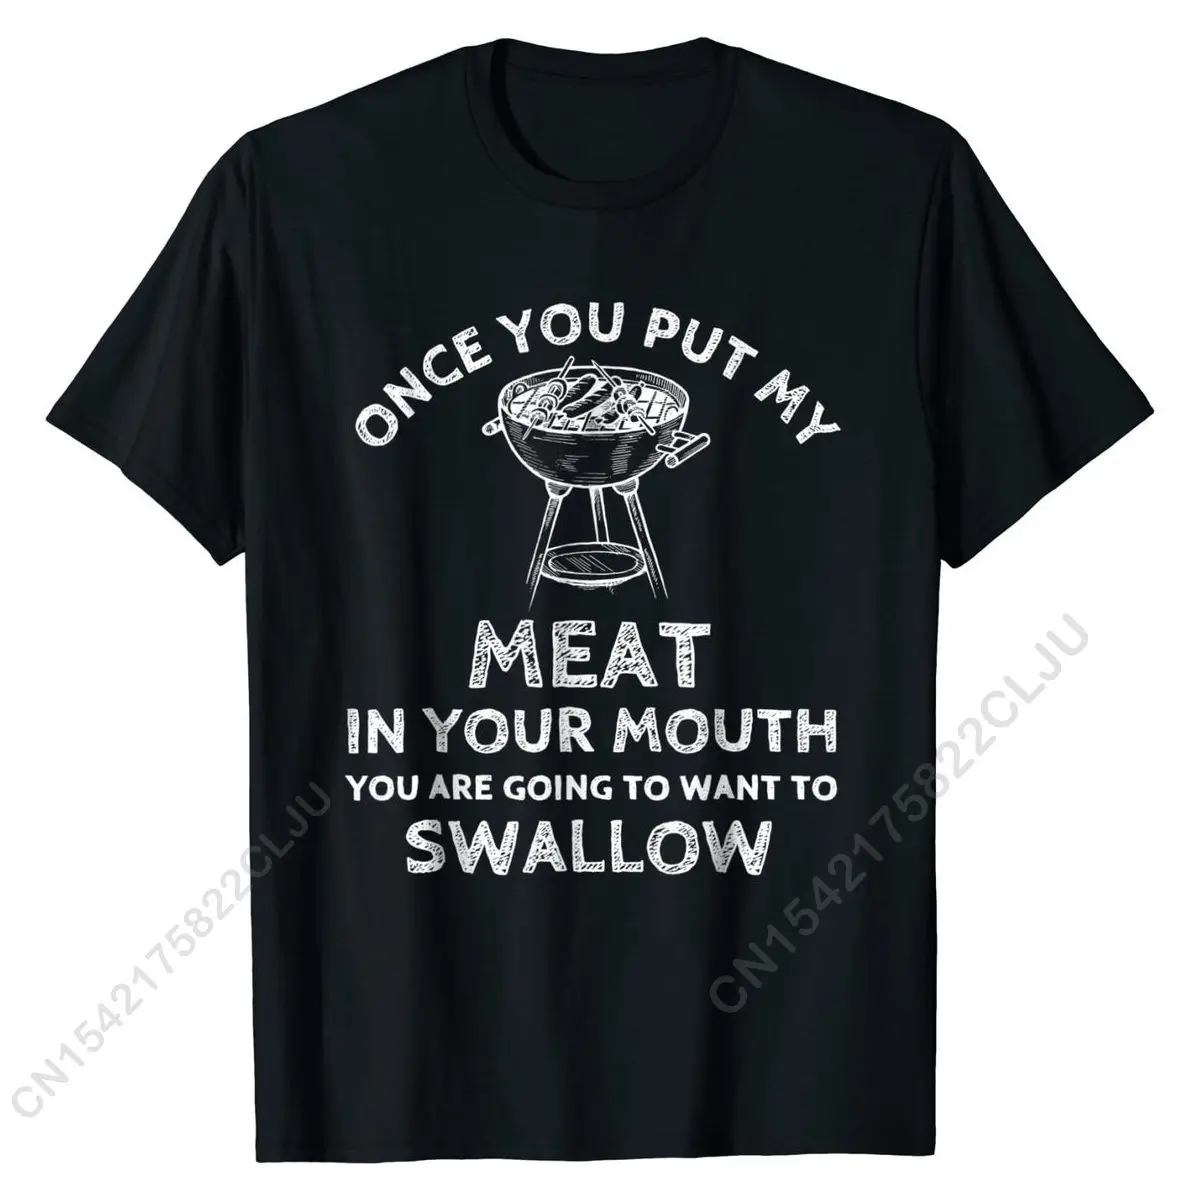 ONCE YOU PUT MY MEAT IN YOUR MOUTH YOU FUNNY BBQ GRILL SHIRT Cotton Man Tshirts Design Tops & Tees Classic Hip Hop